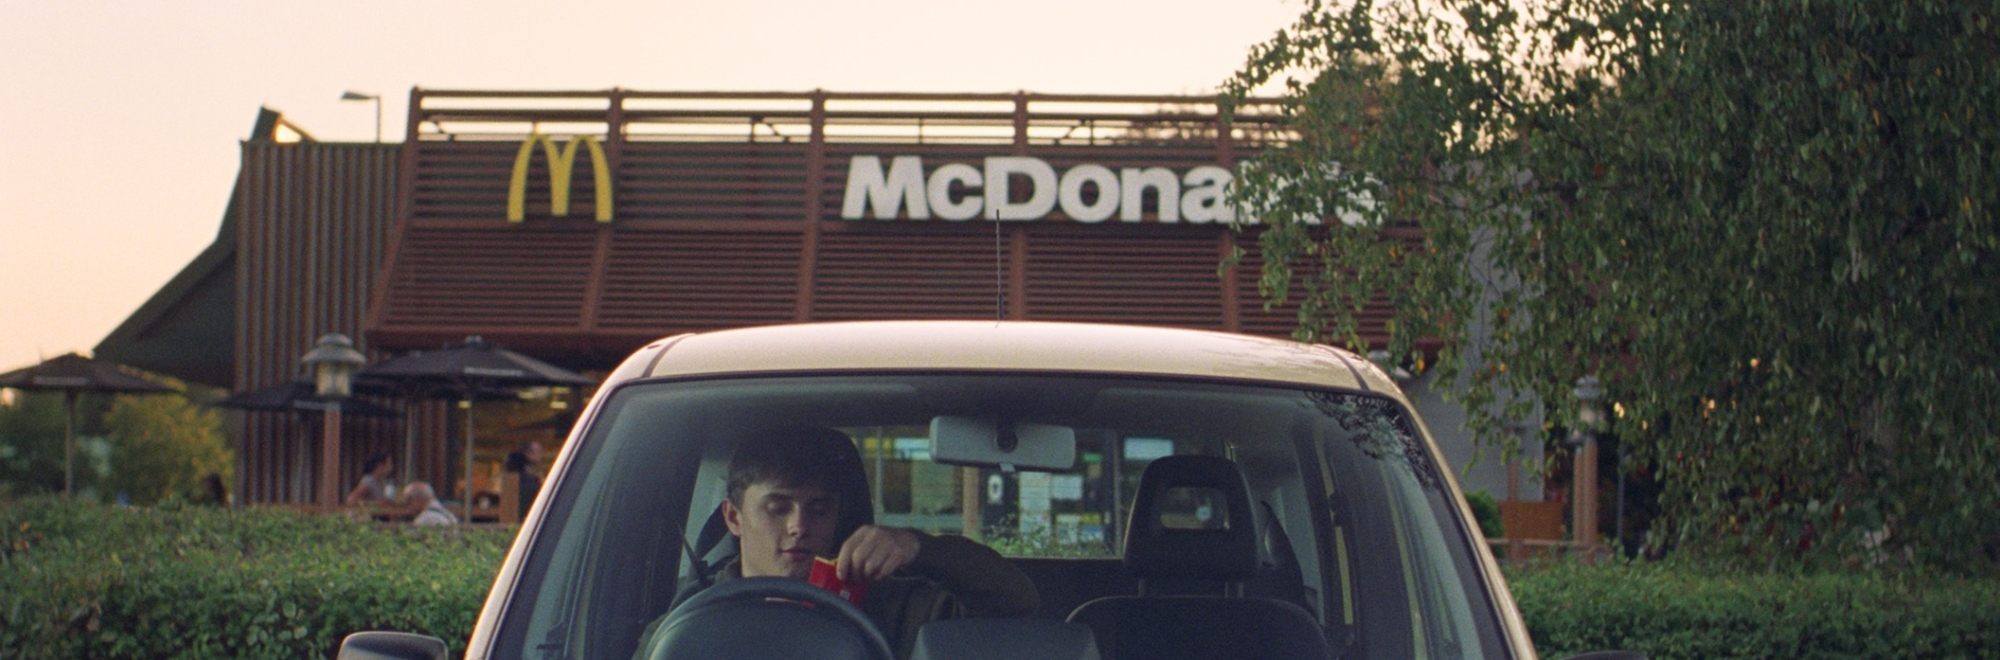 'The Gift' from McDonald’s reminds us to savour the small things